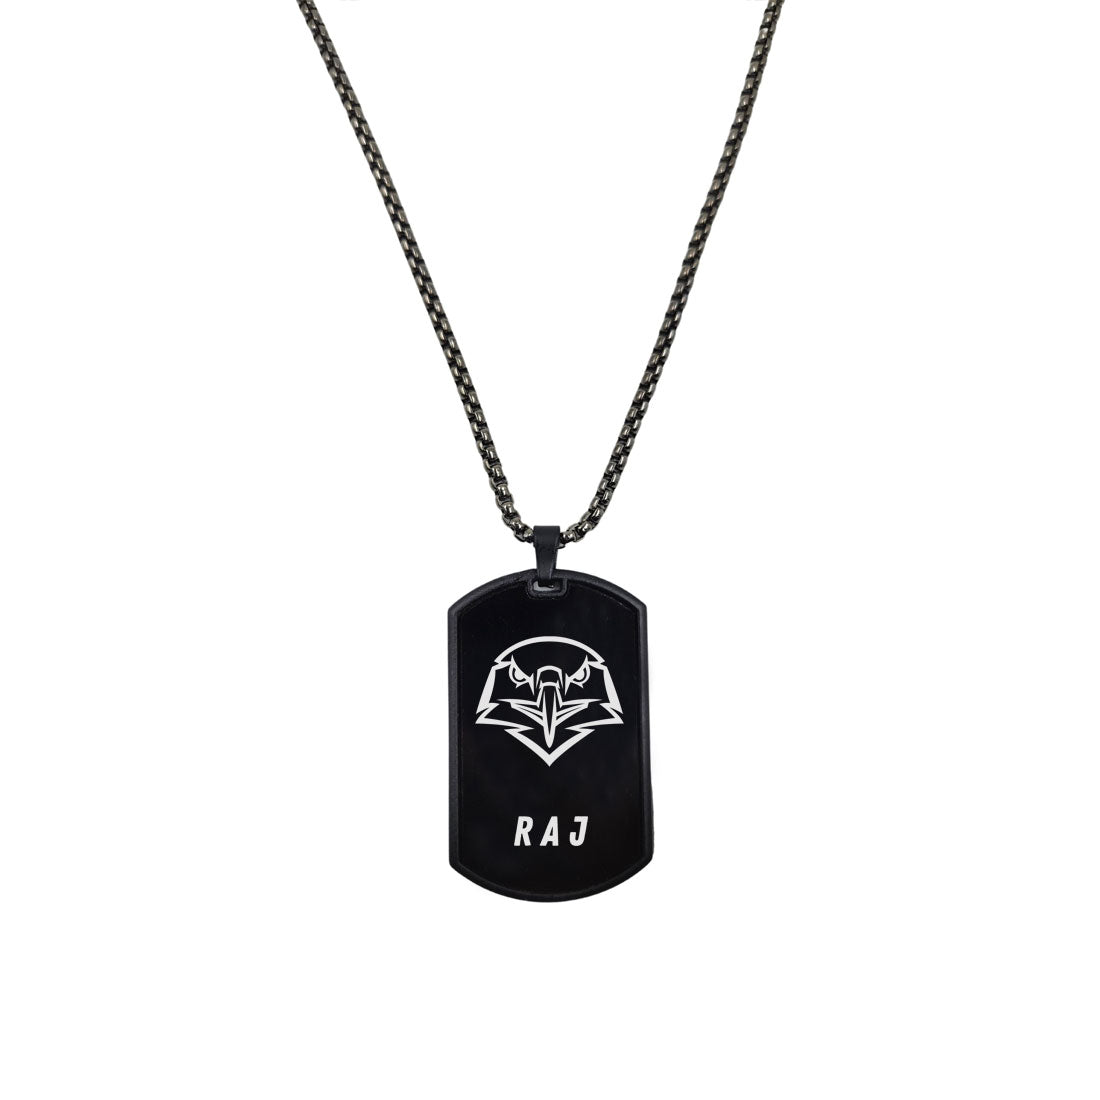 Personalized Dog Tag Chain for Men Women Military Army Dog Tags Engraved